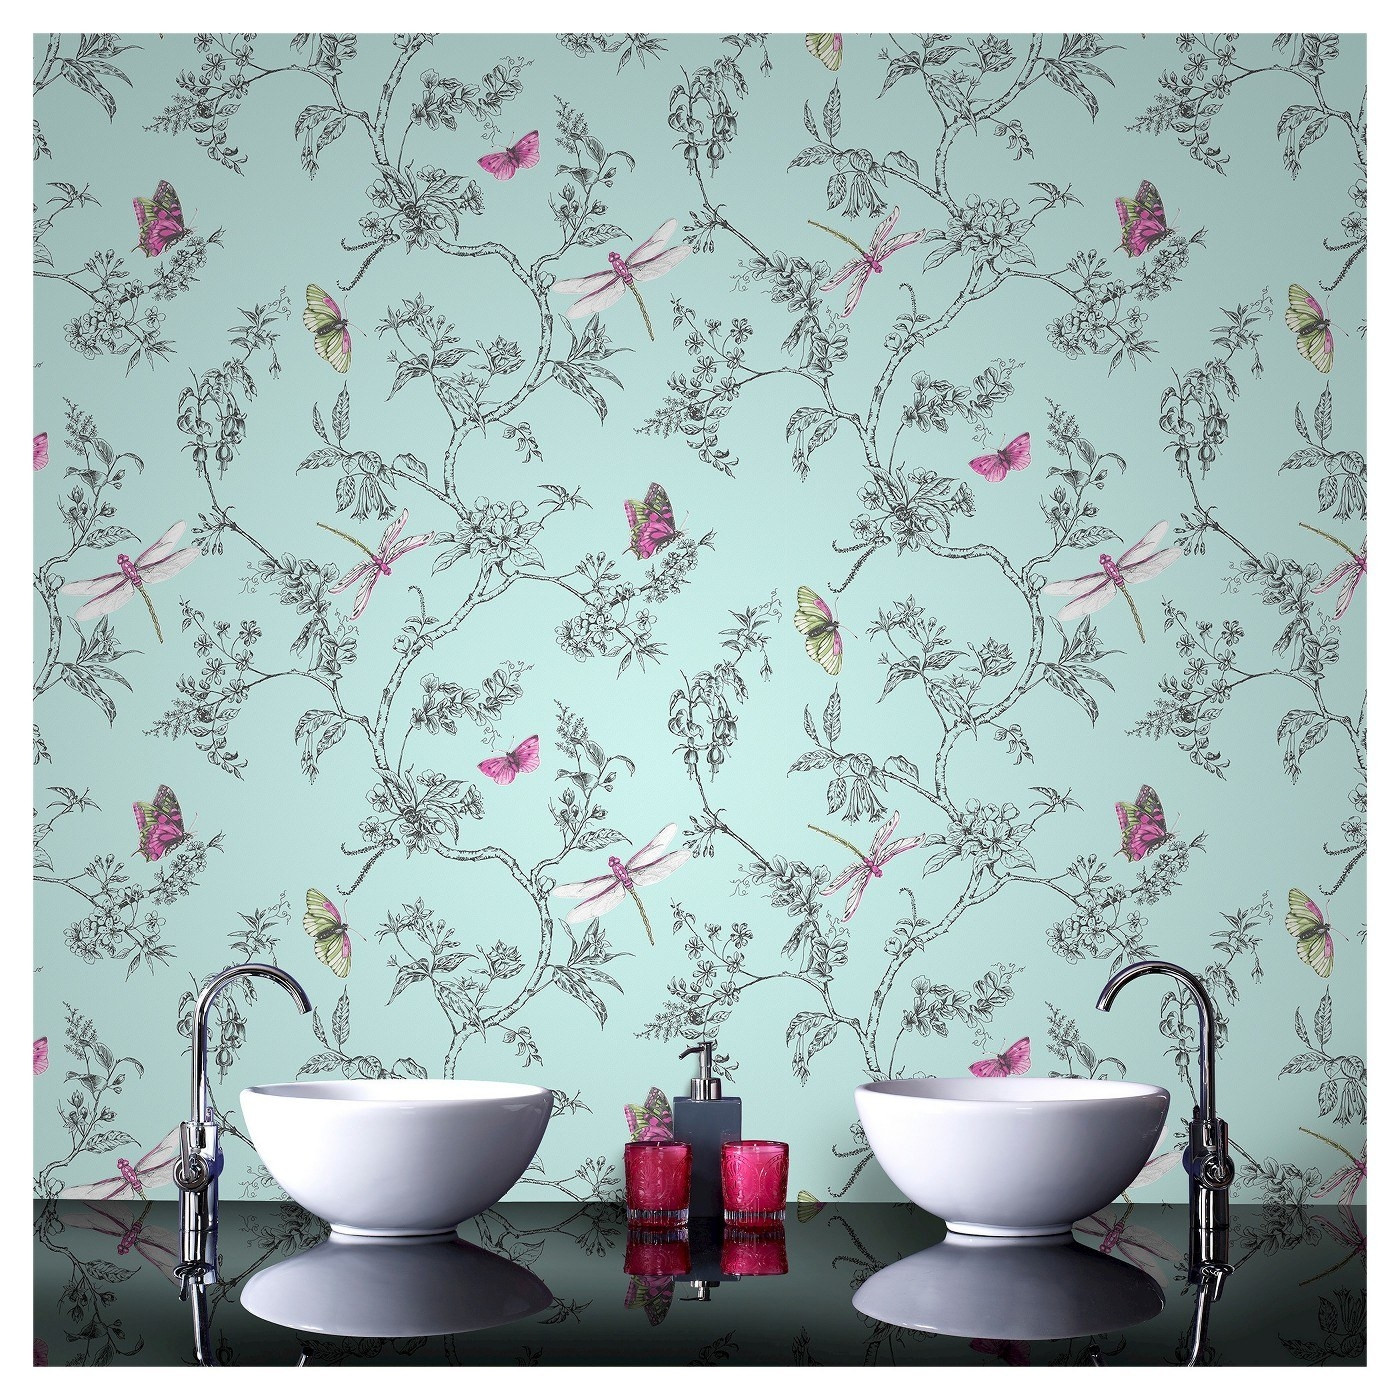 5 Places to Buy Wallpaper on a Budget